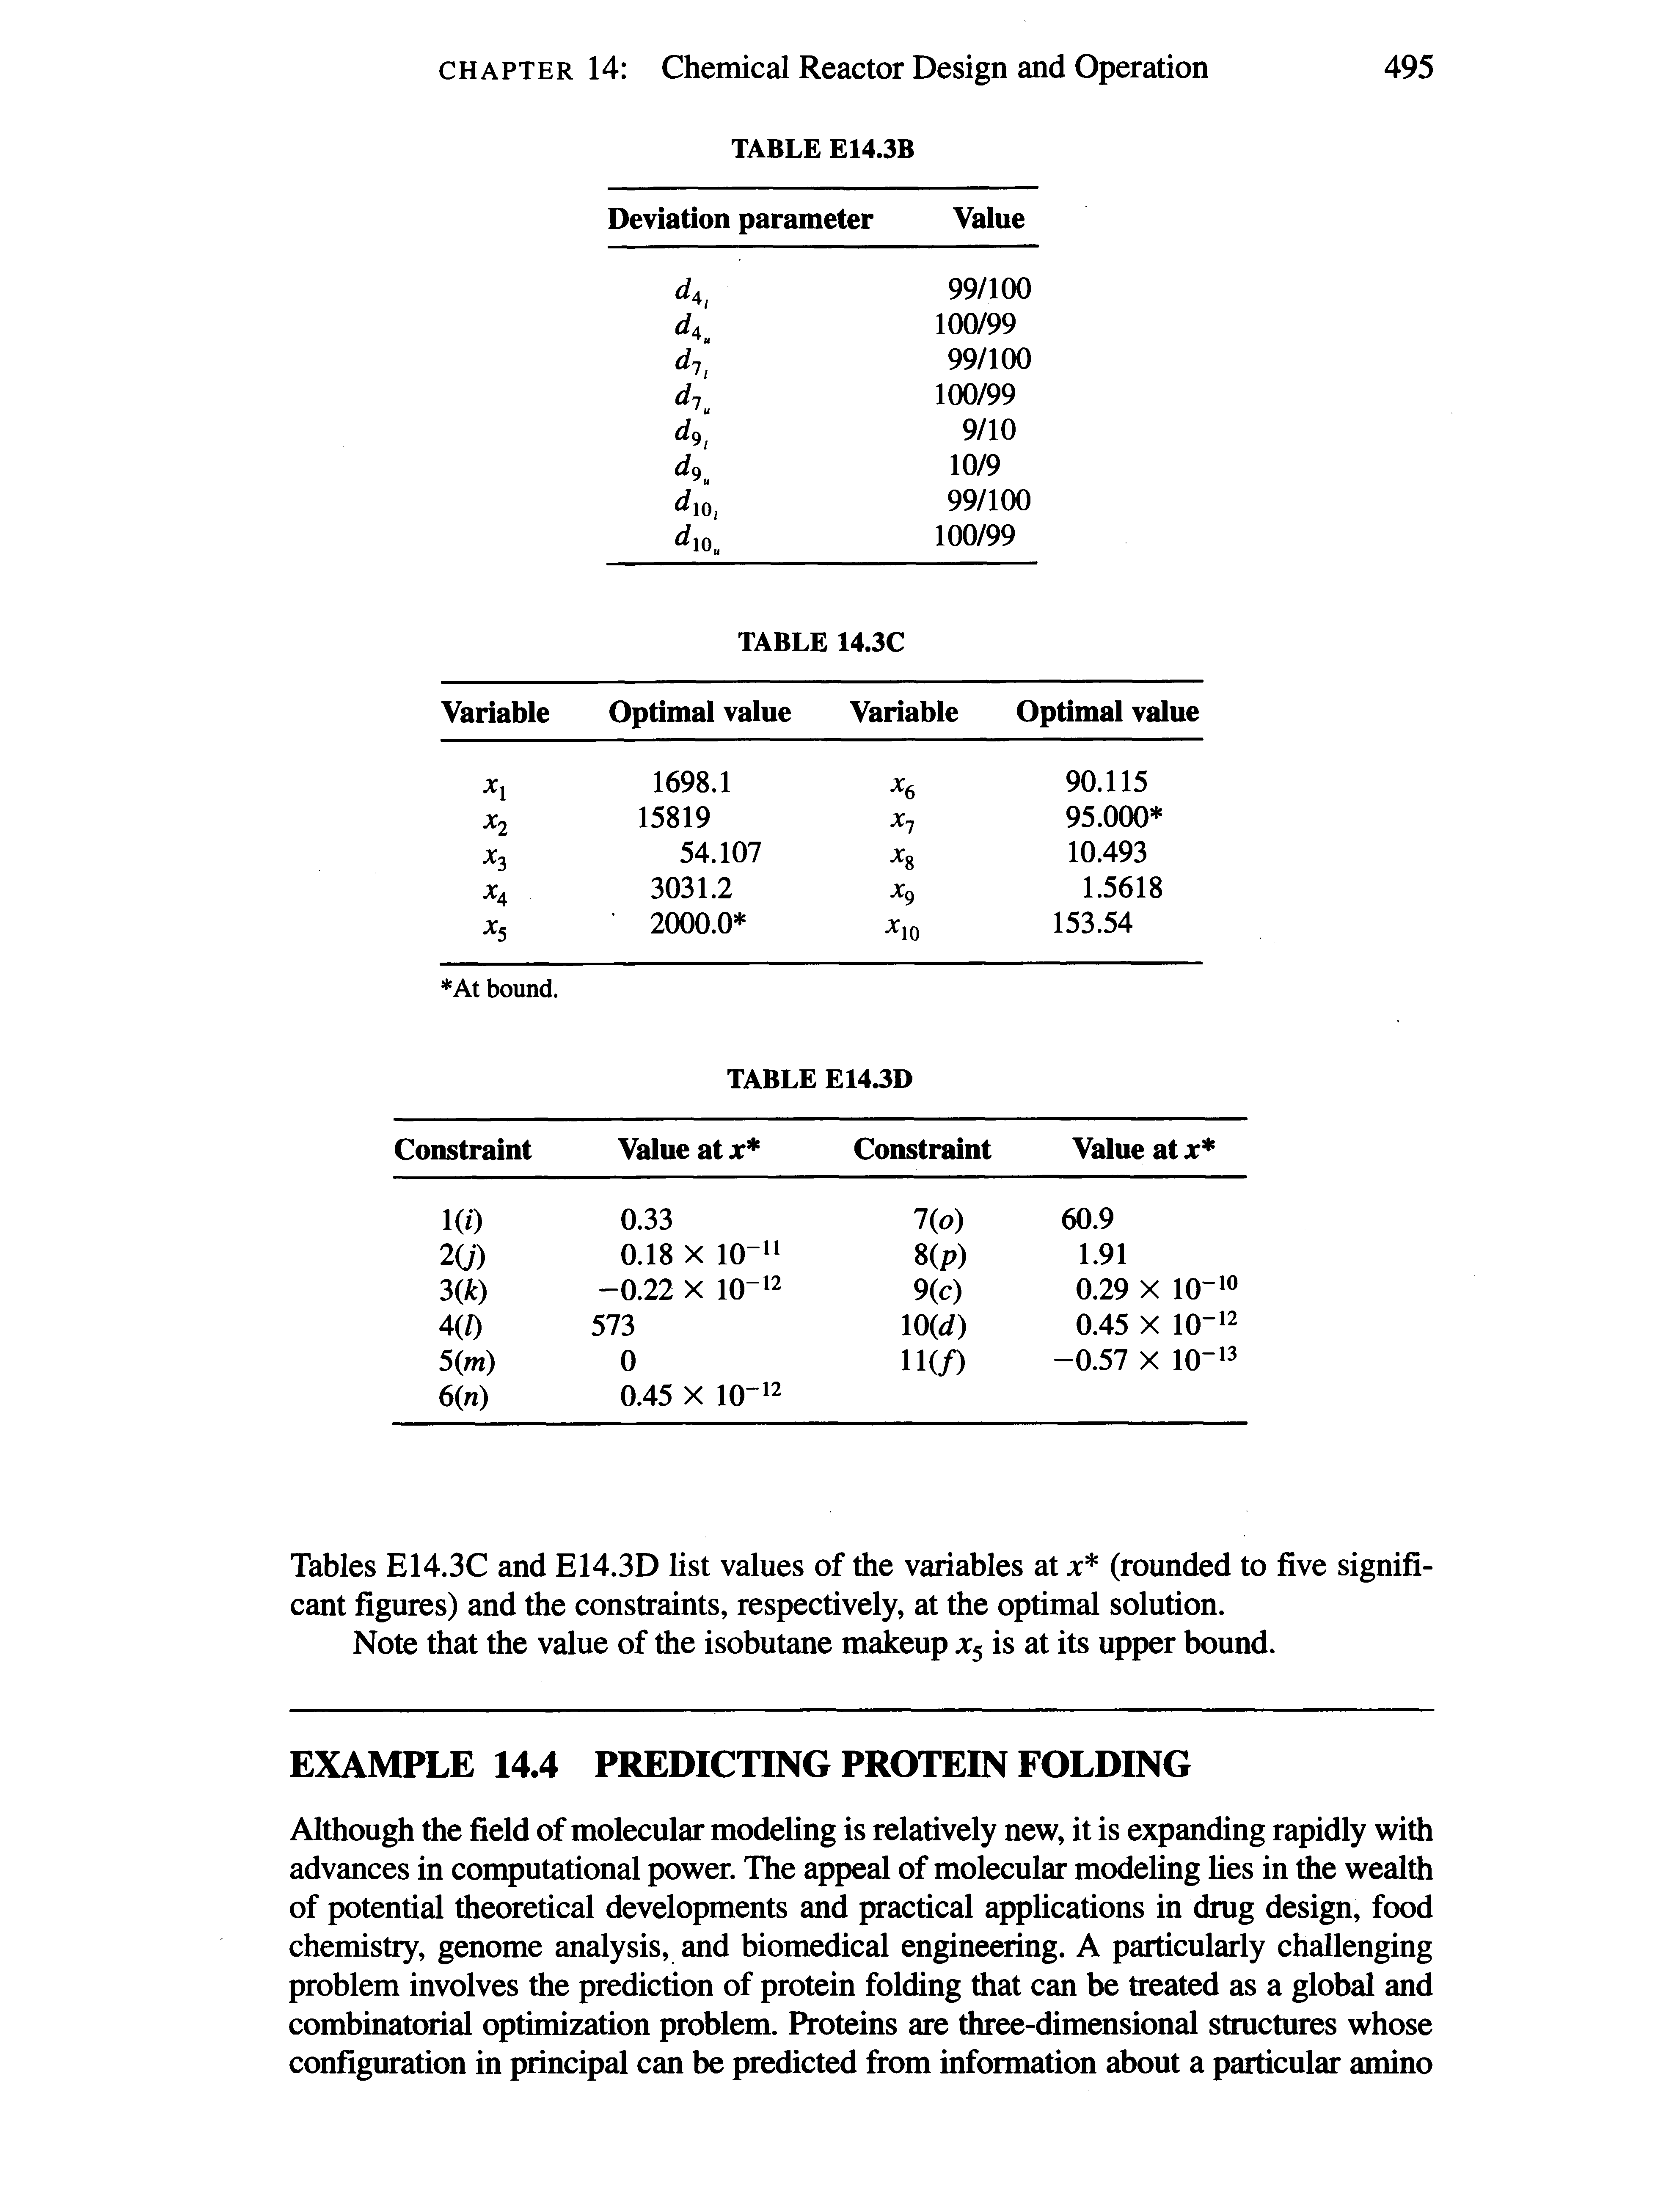 Tables E14.3C and E14.3D list values of the variables at x (rounded to five significant figures) and the constraints, respectively, at the optimal solution.